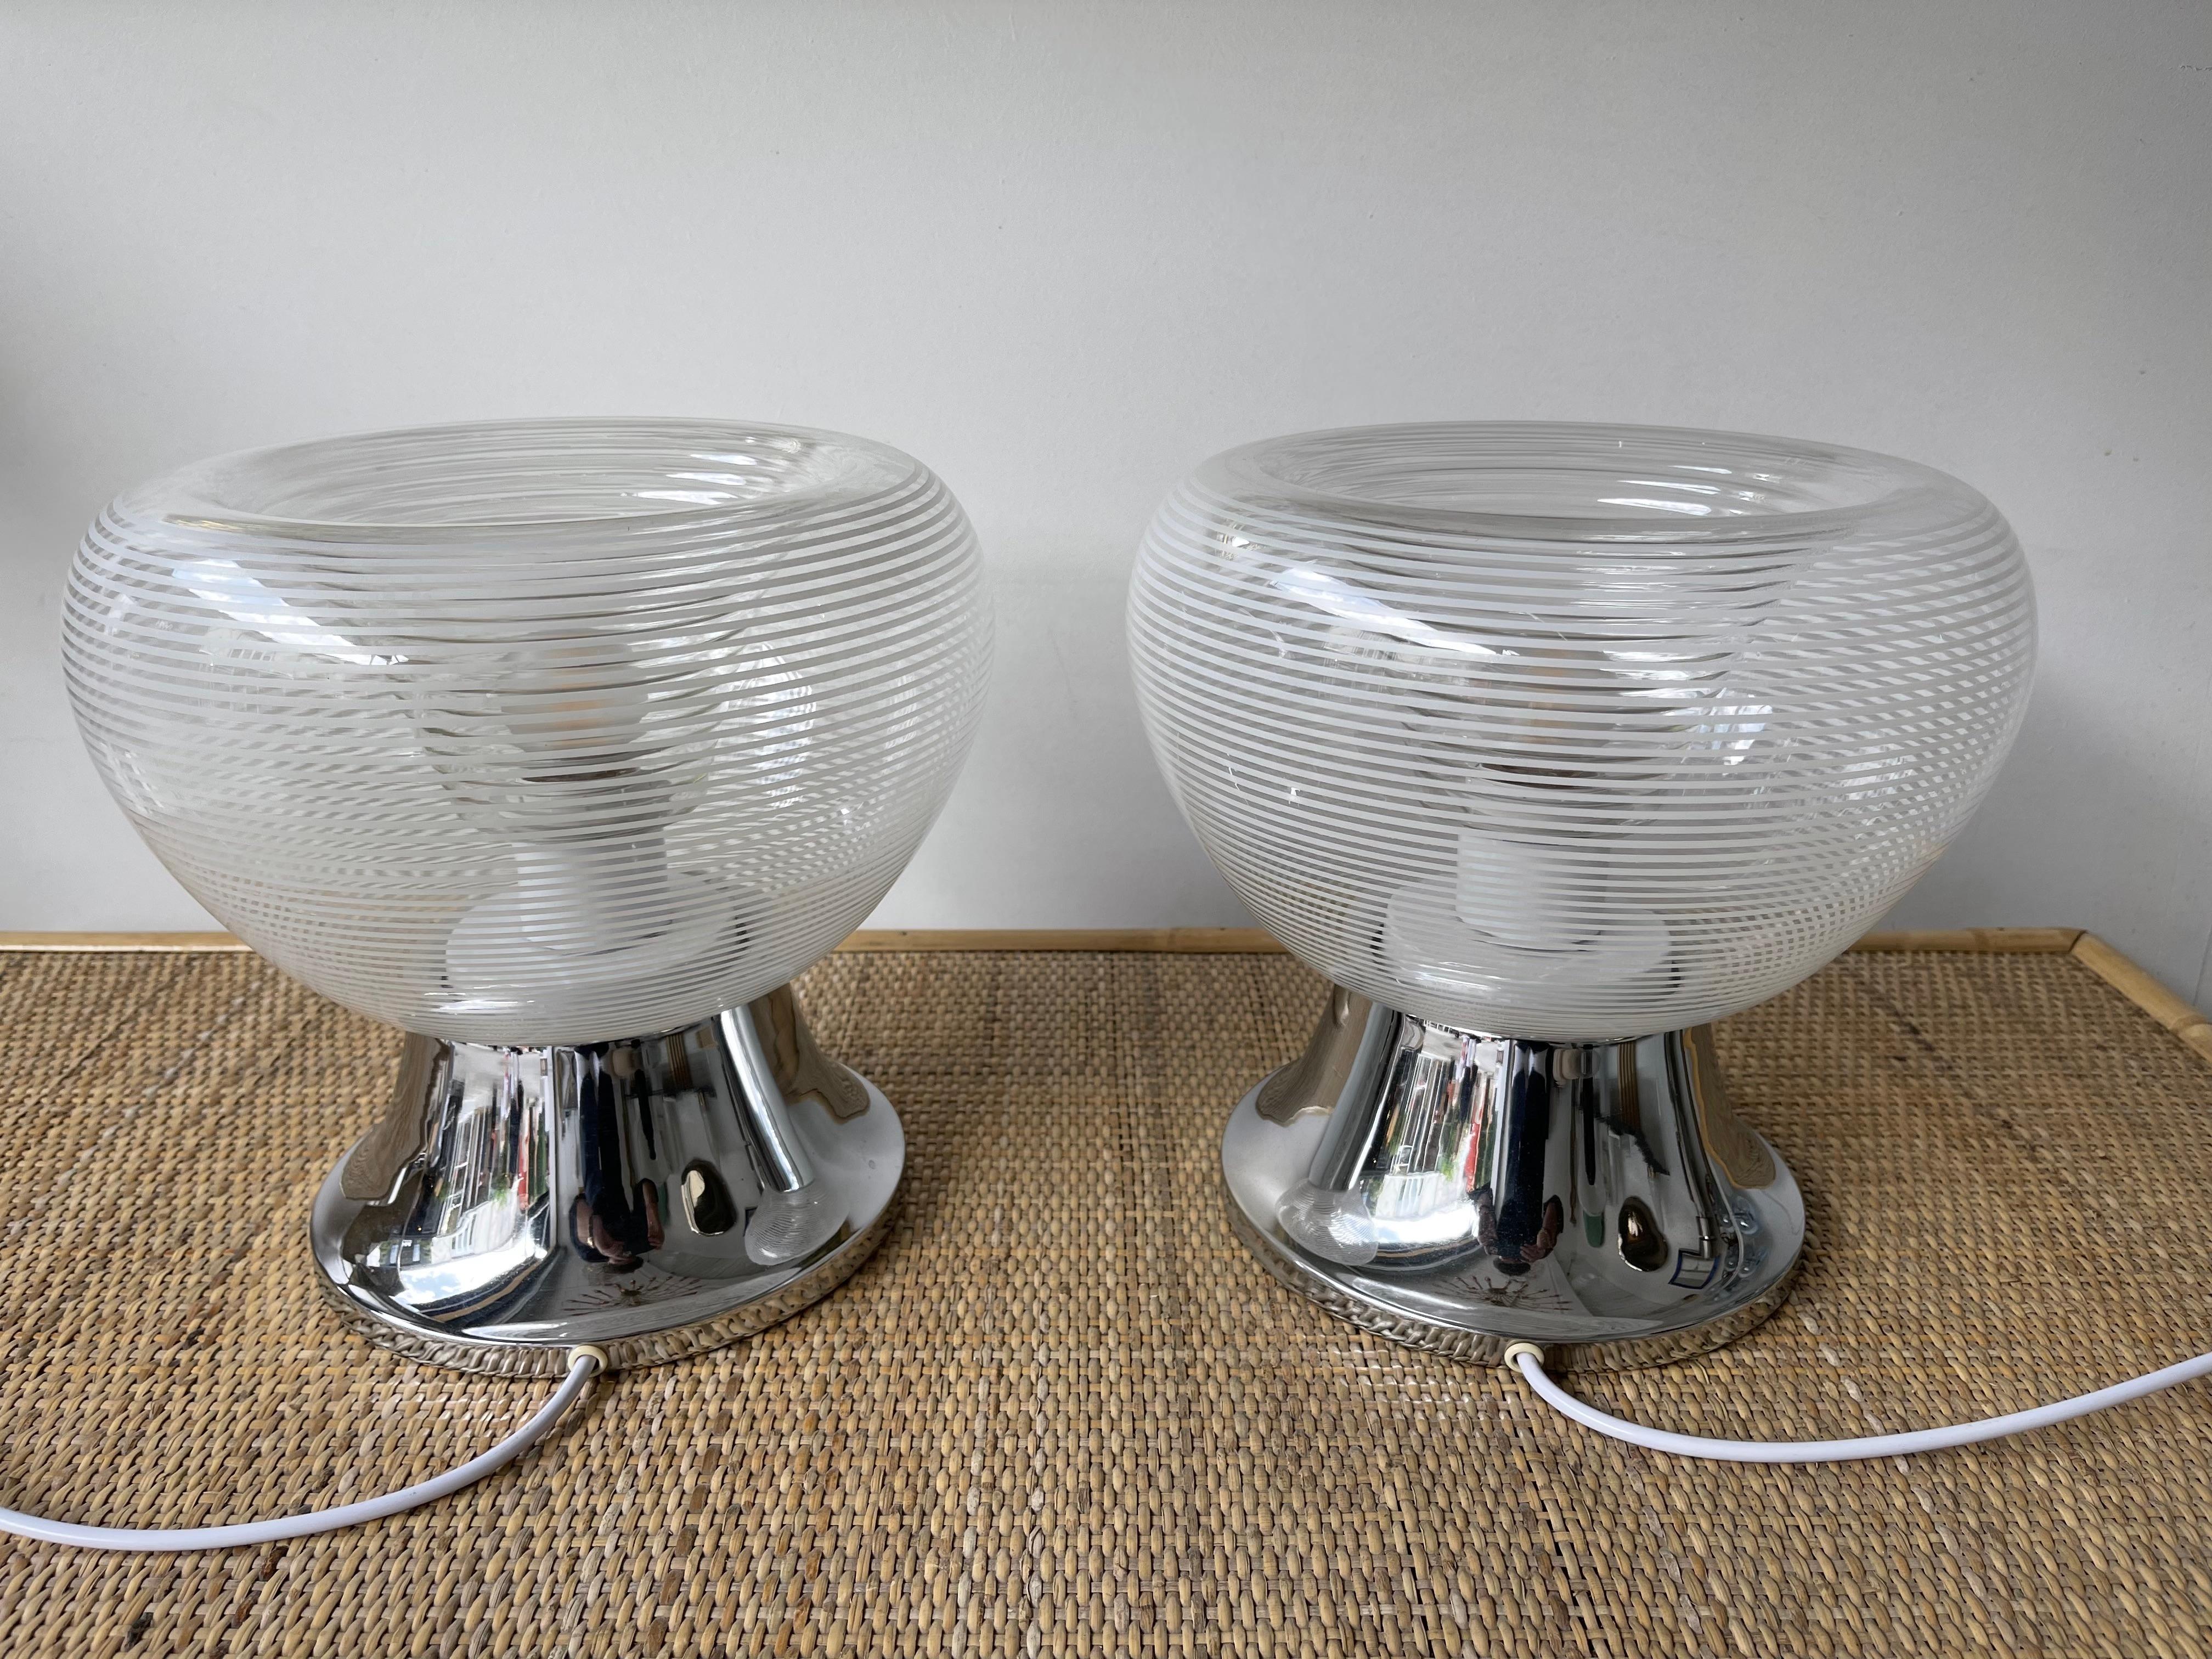 Pair of Stripe Murano Glass and Metal Chrome Lamps by VeArt, Italy, 1970s For Sale 8